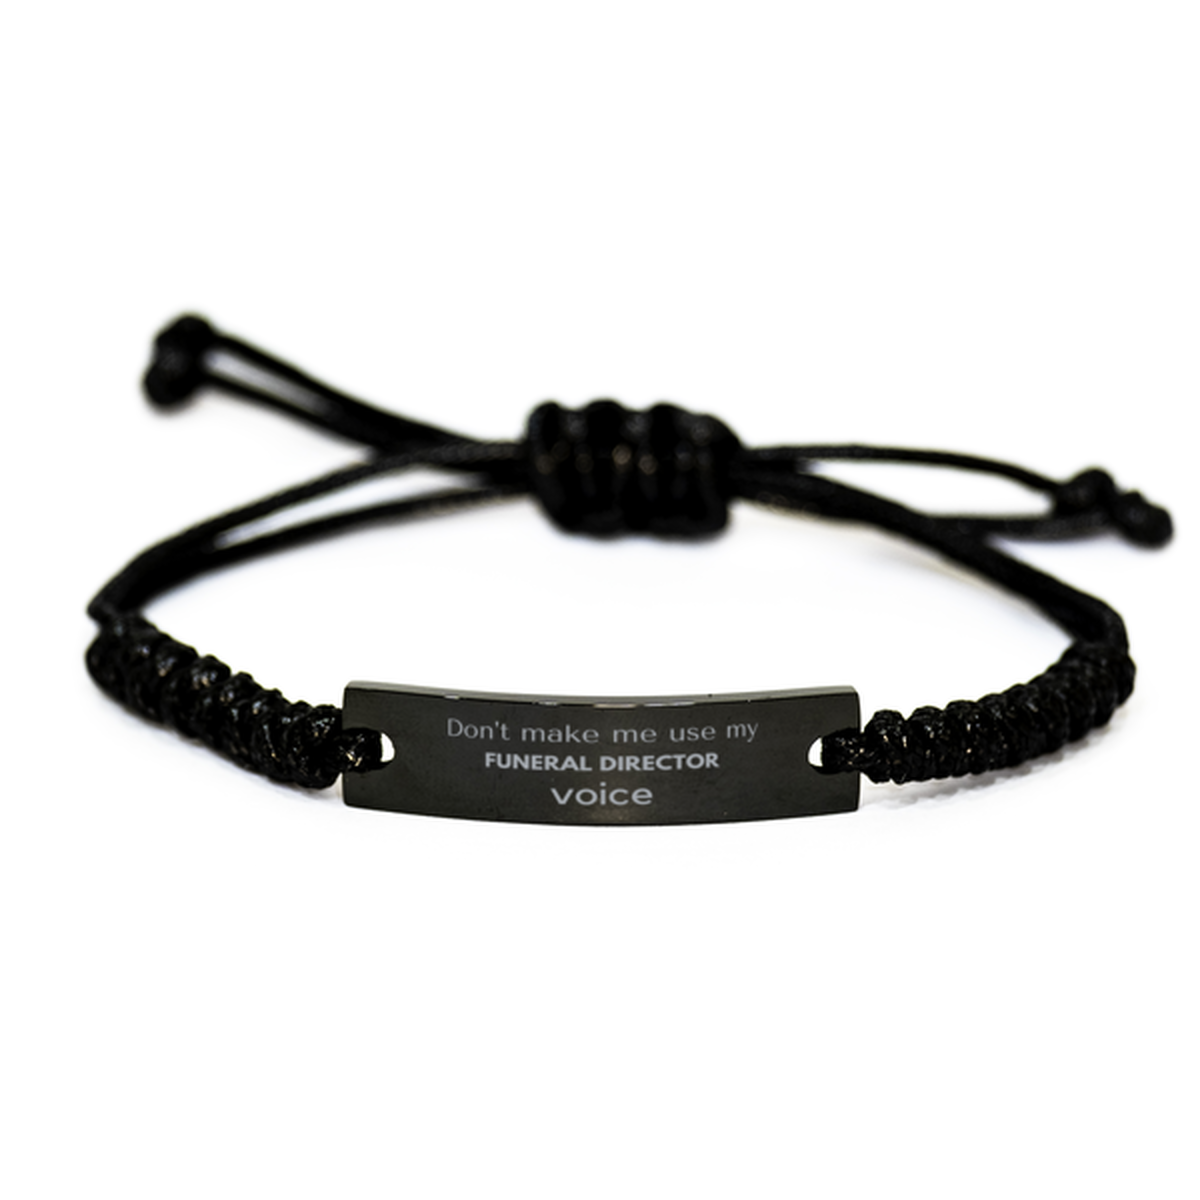 Don't make me use my Funeral Director voice, Sarcasm Funeral Director Gifts, Christmas Funeral Director Black Rope Bracelet Birthday Unique Gifts For Funeral Director Coworkers, Men, Women, Colleague, Friends